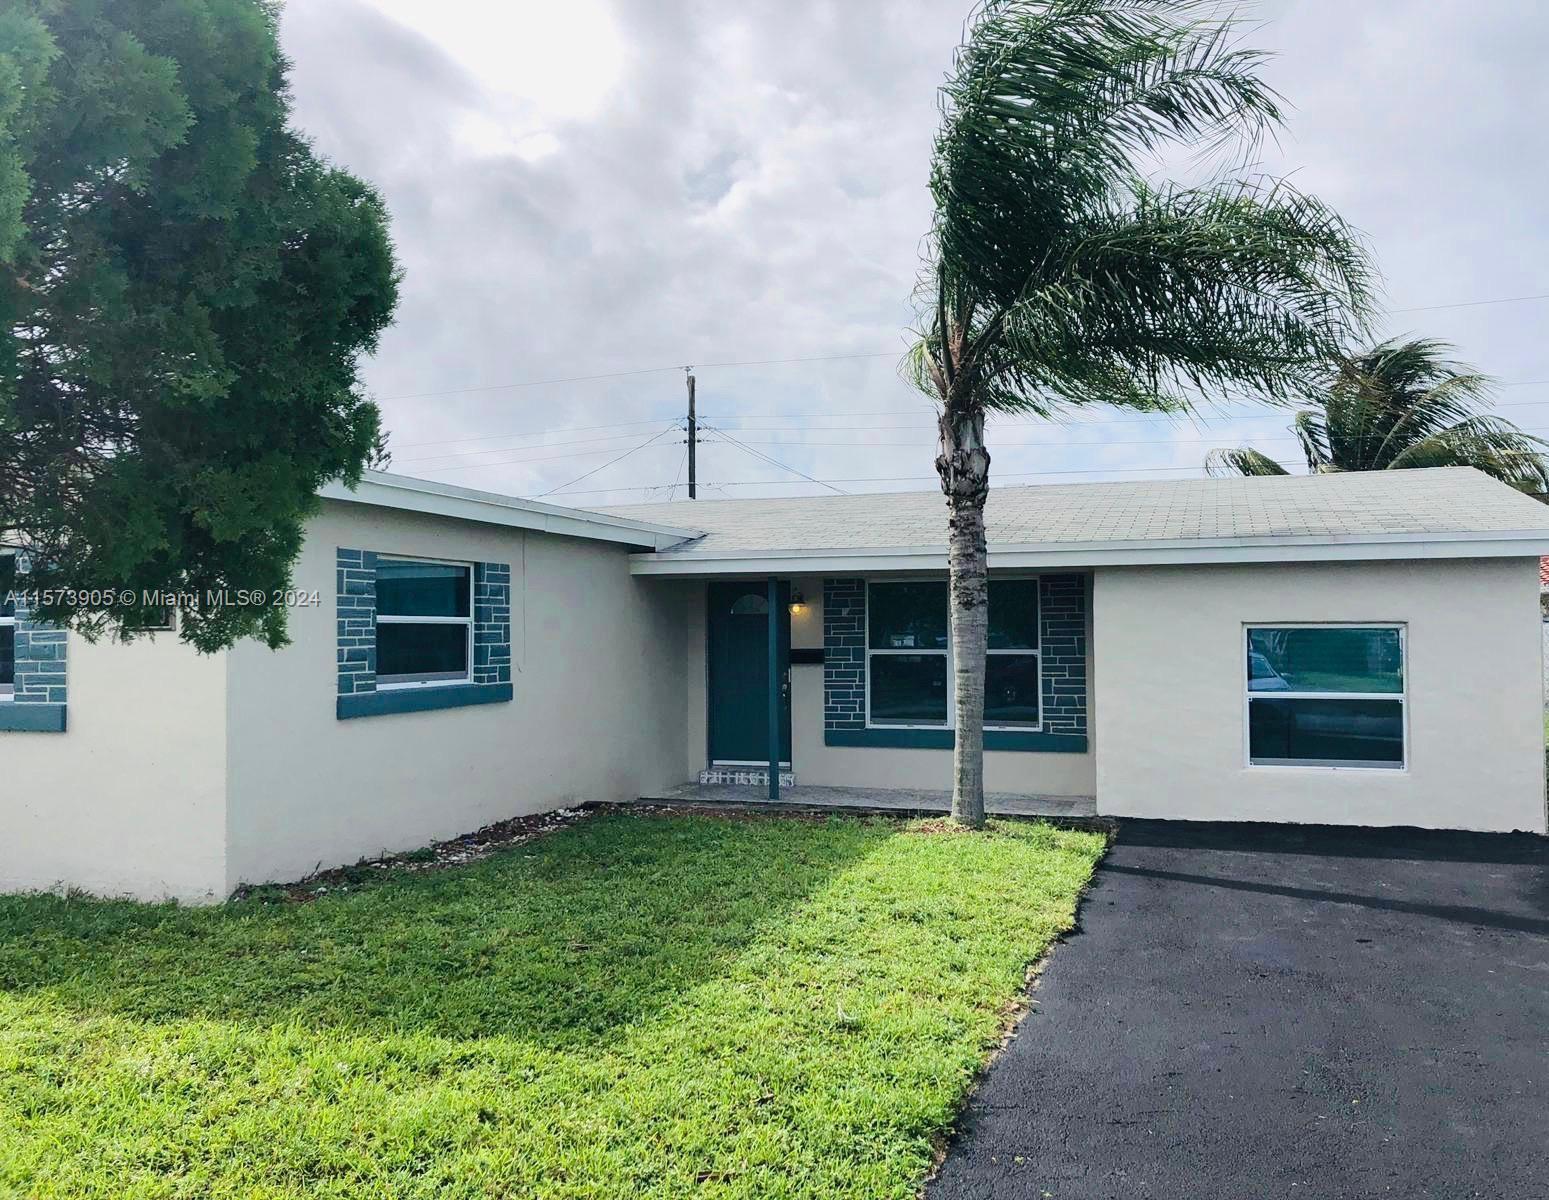 Photo of 6470 Coolidge St in Hollywood, FL